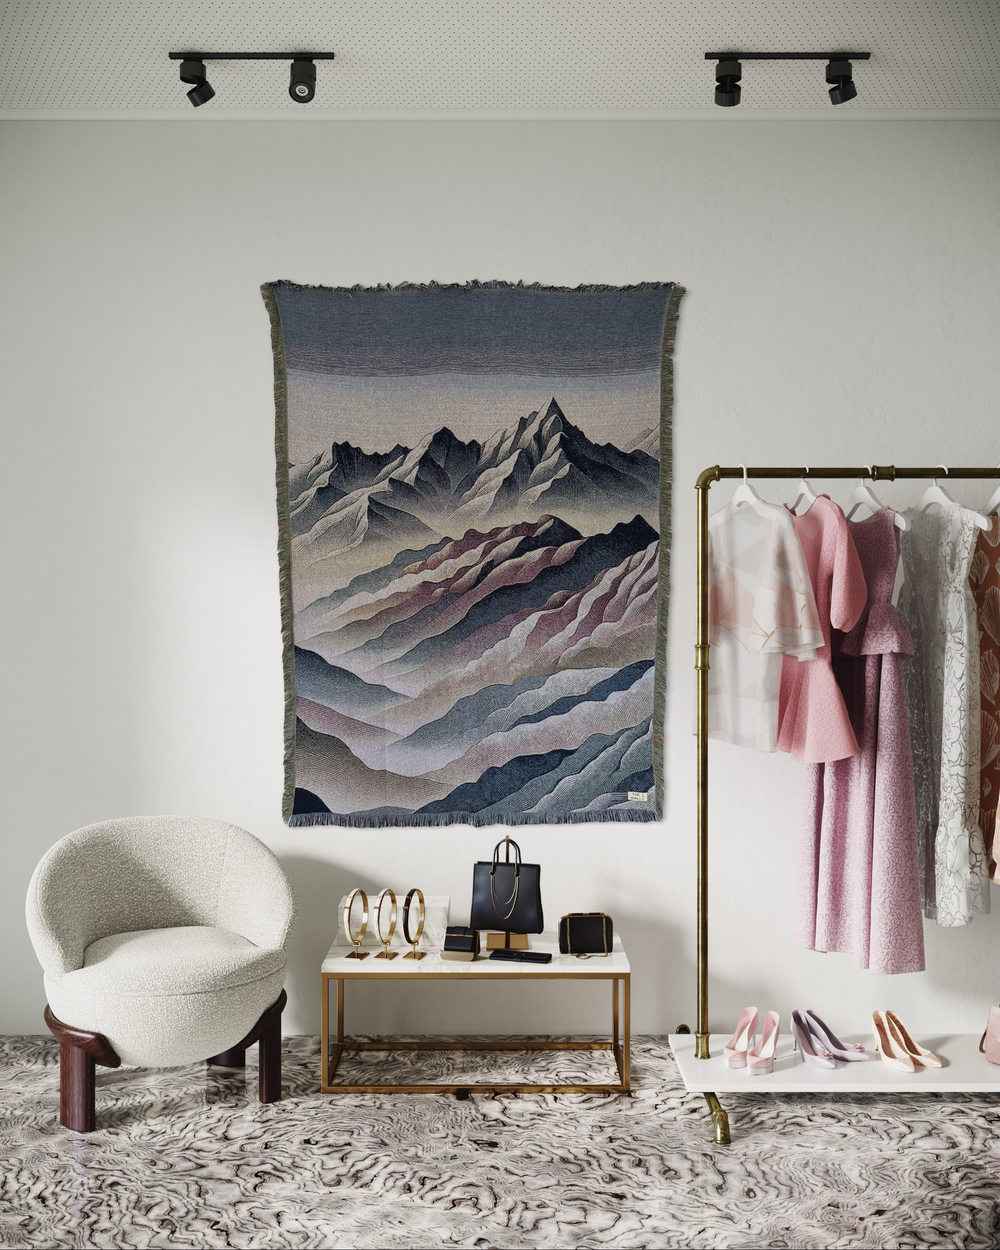 A wall rug with a mountain range